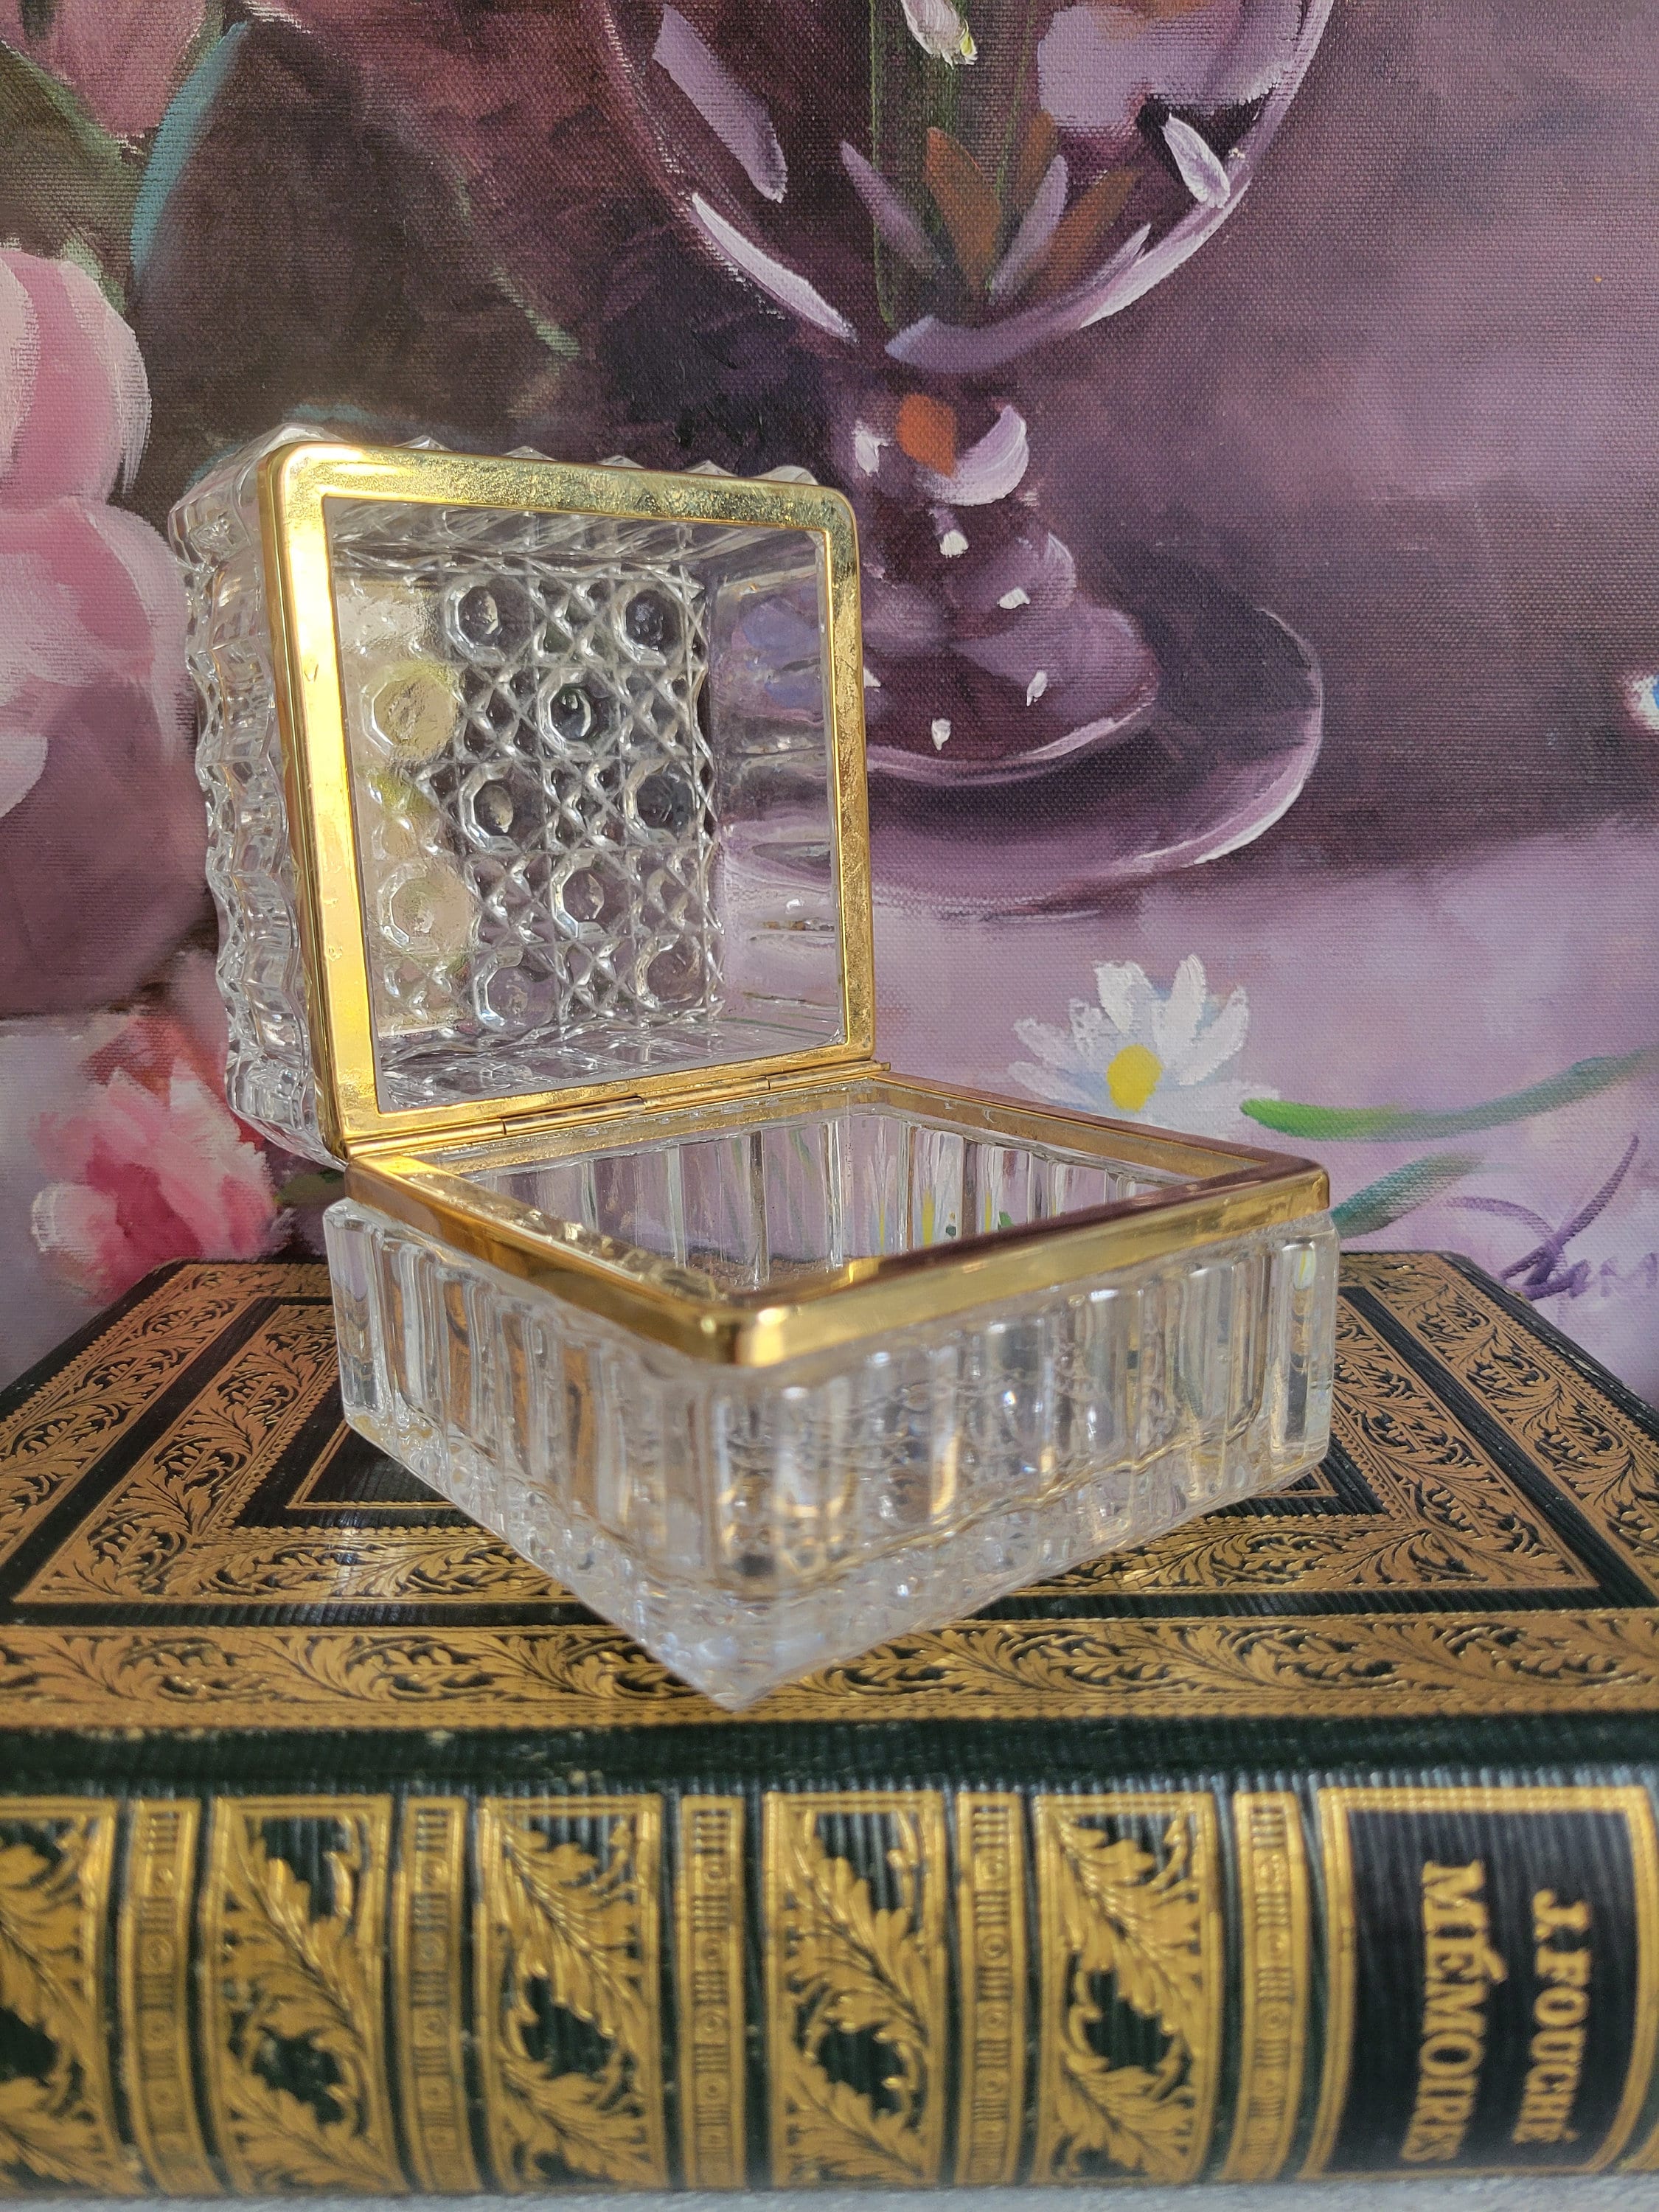 Rectangular Gold Metal Structure Glass Jewelry Box Size 26*13cm No. 81241